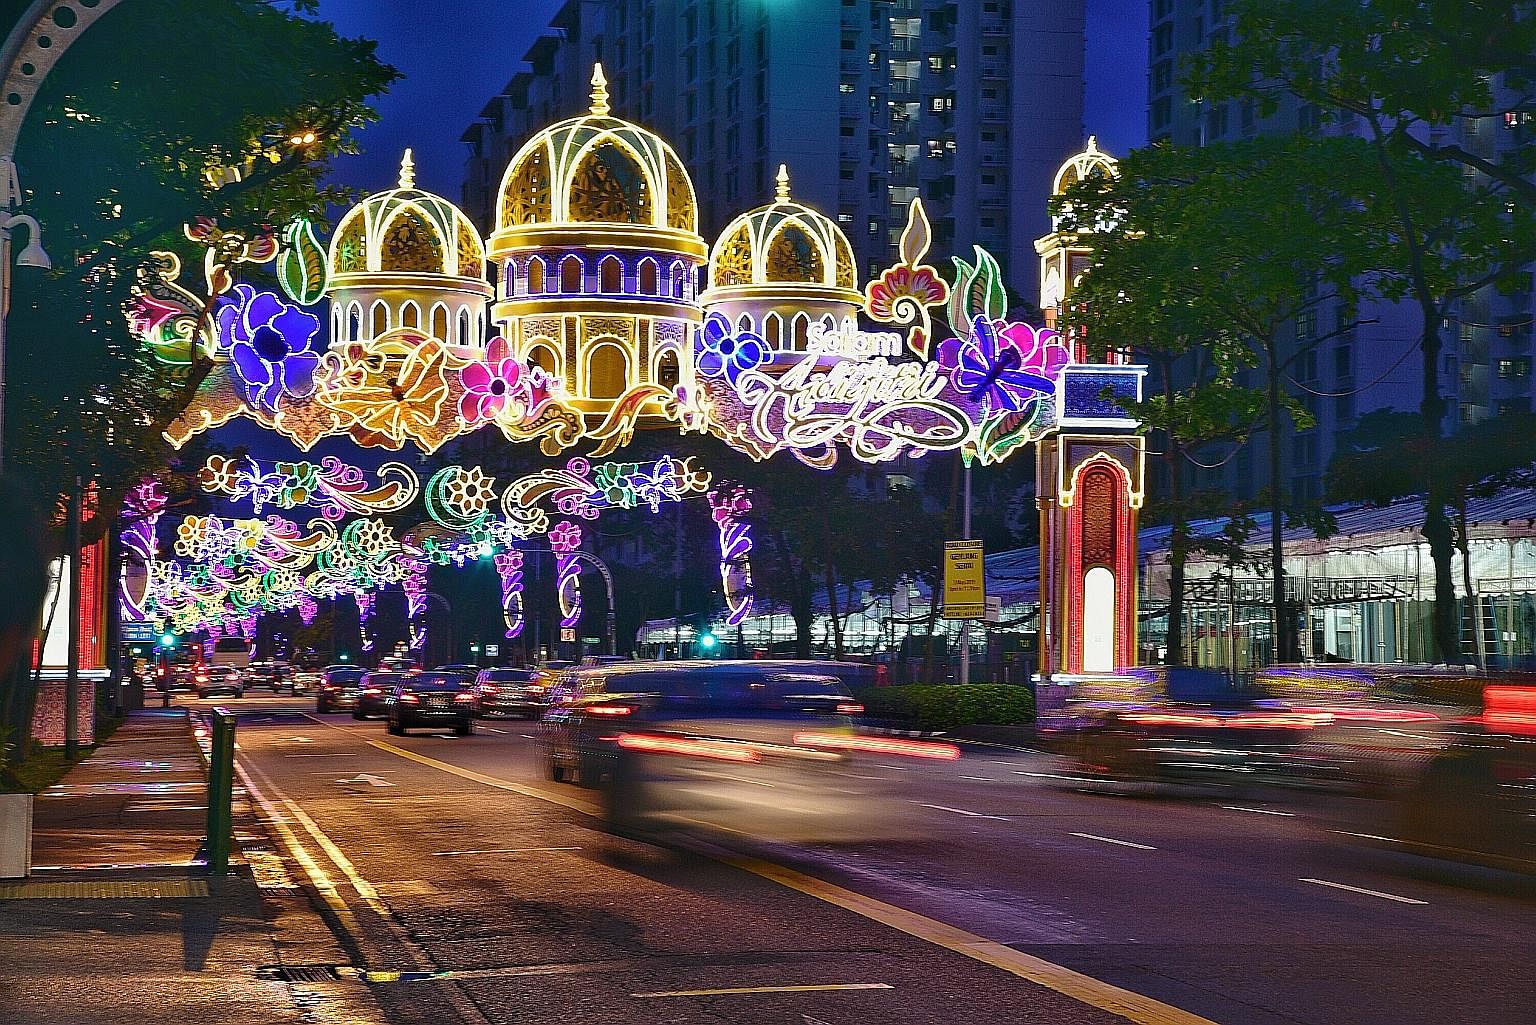 A 15.4m-high and 23m-wide arch along Sims Avenue features a mosque with golden domes surrounded by full blooms that symbolise a new beginning and renewed bonds of friendship and kinship. The decoration is part of the annual Hari Raya light-up, which 